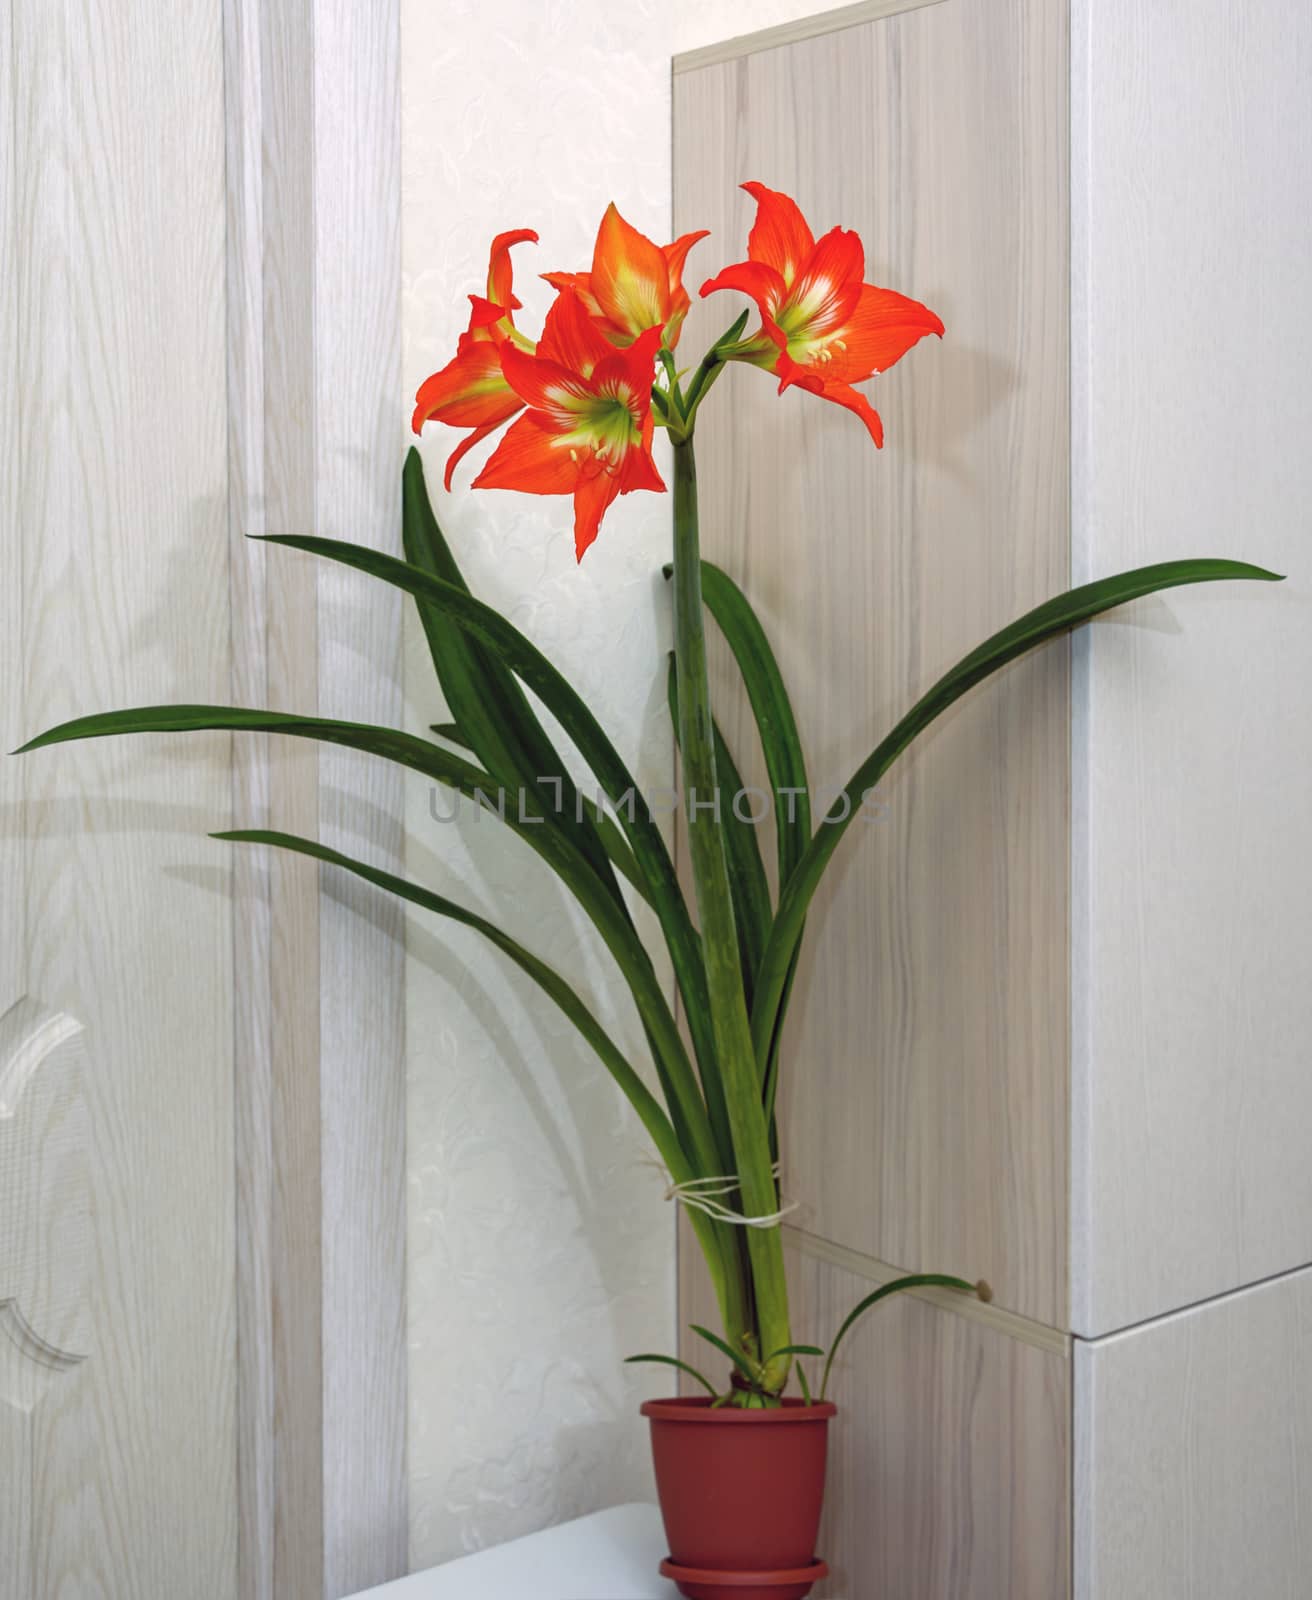 Hippeastrum is an amazing bulbous plant, bright, red and orange with a white-green core, blossomed in four large flowers on a thick green stem with dense narrow leaves.